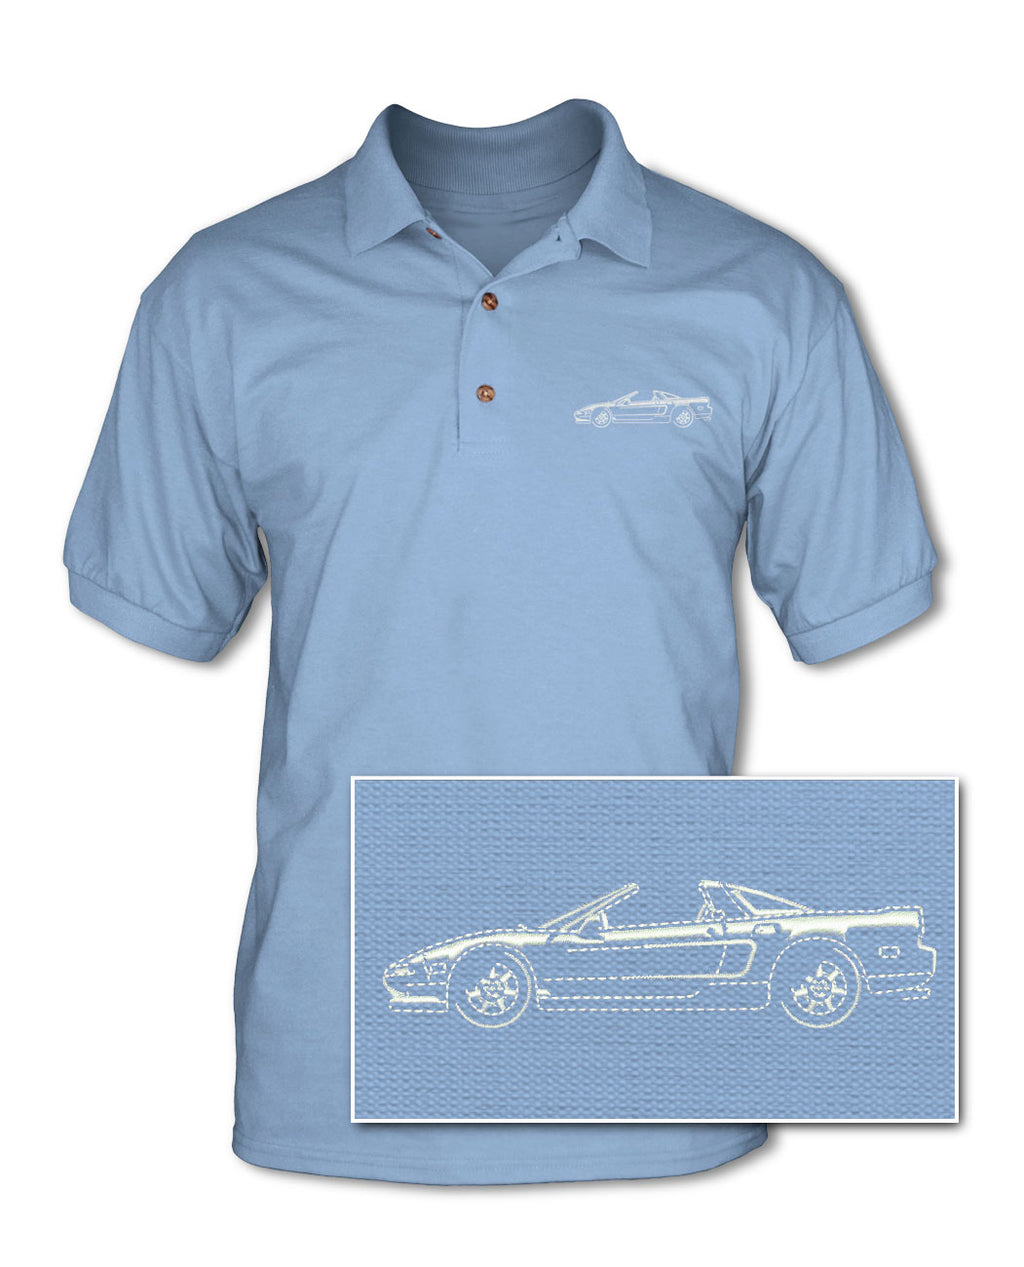 Honda Acura NSX Top Off 1990 - 2005 Adult Pique Polo Shirt - Side View